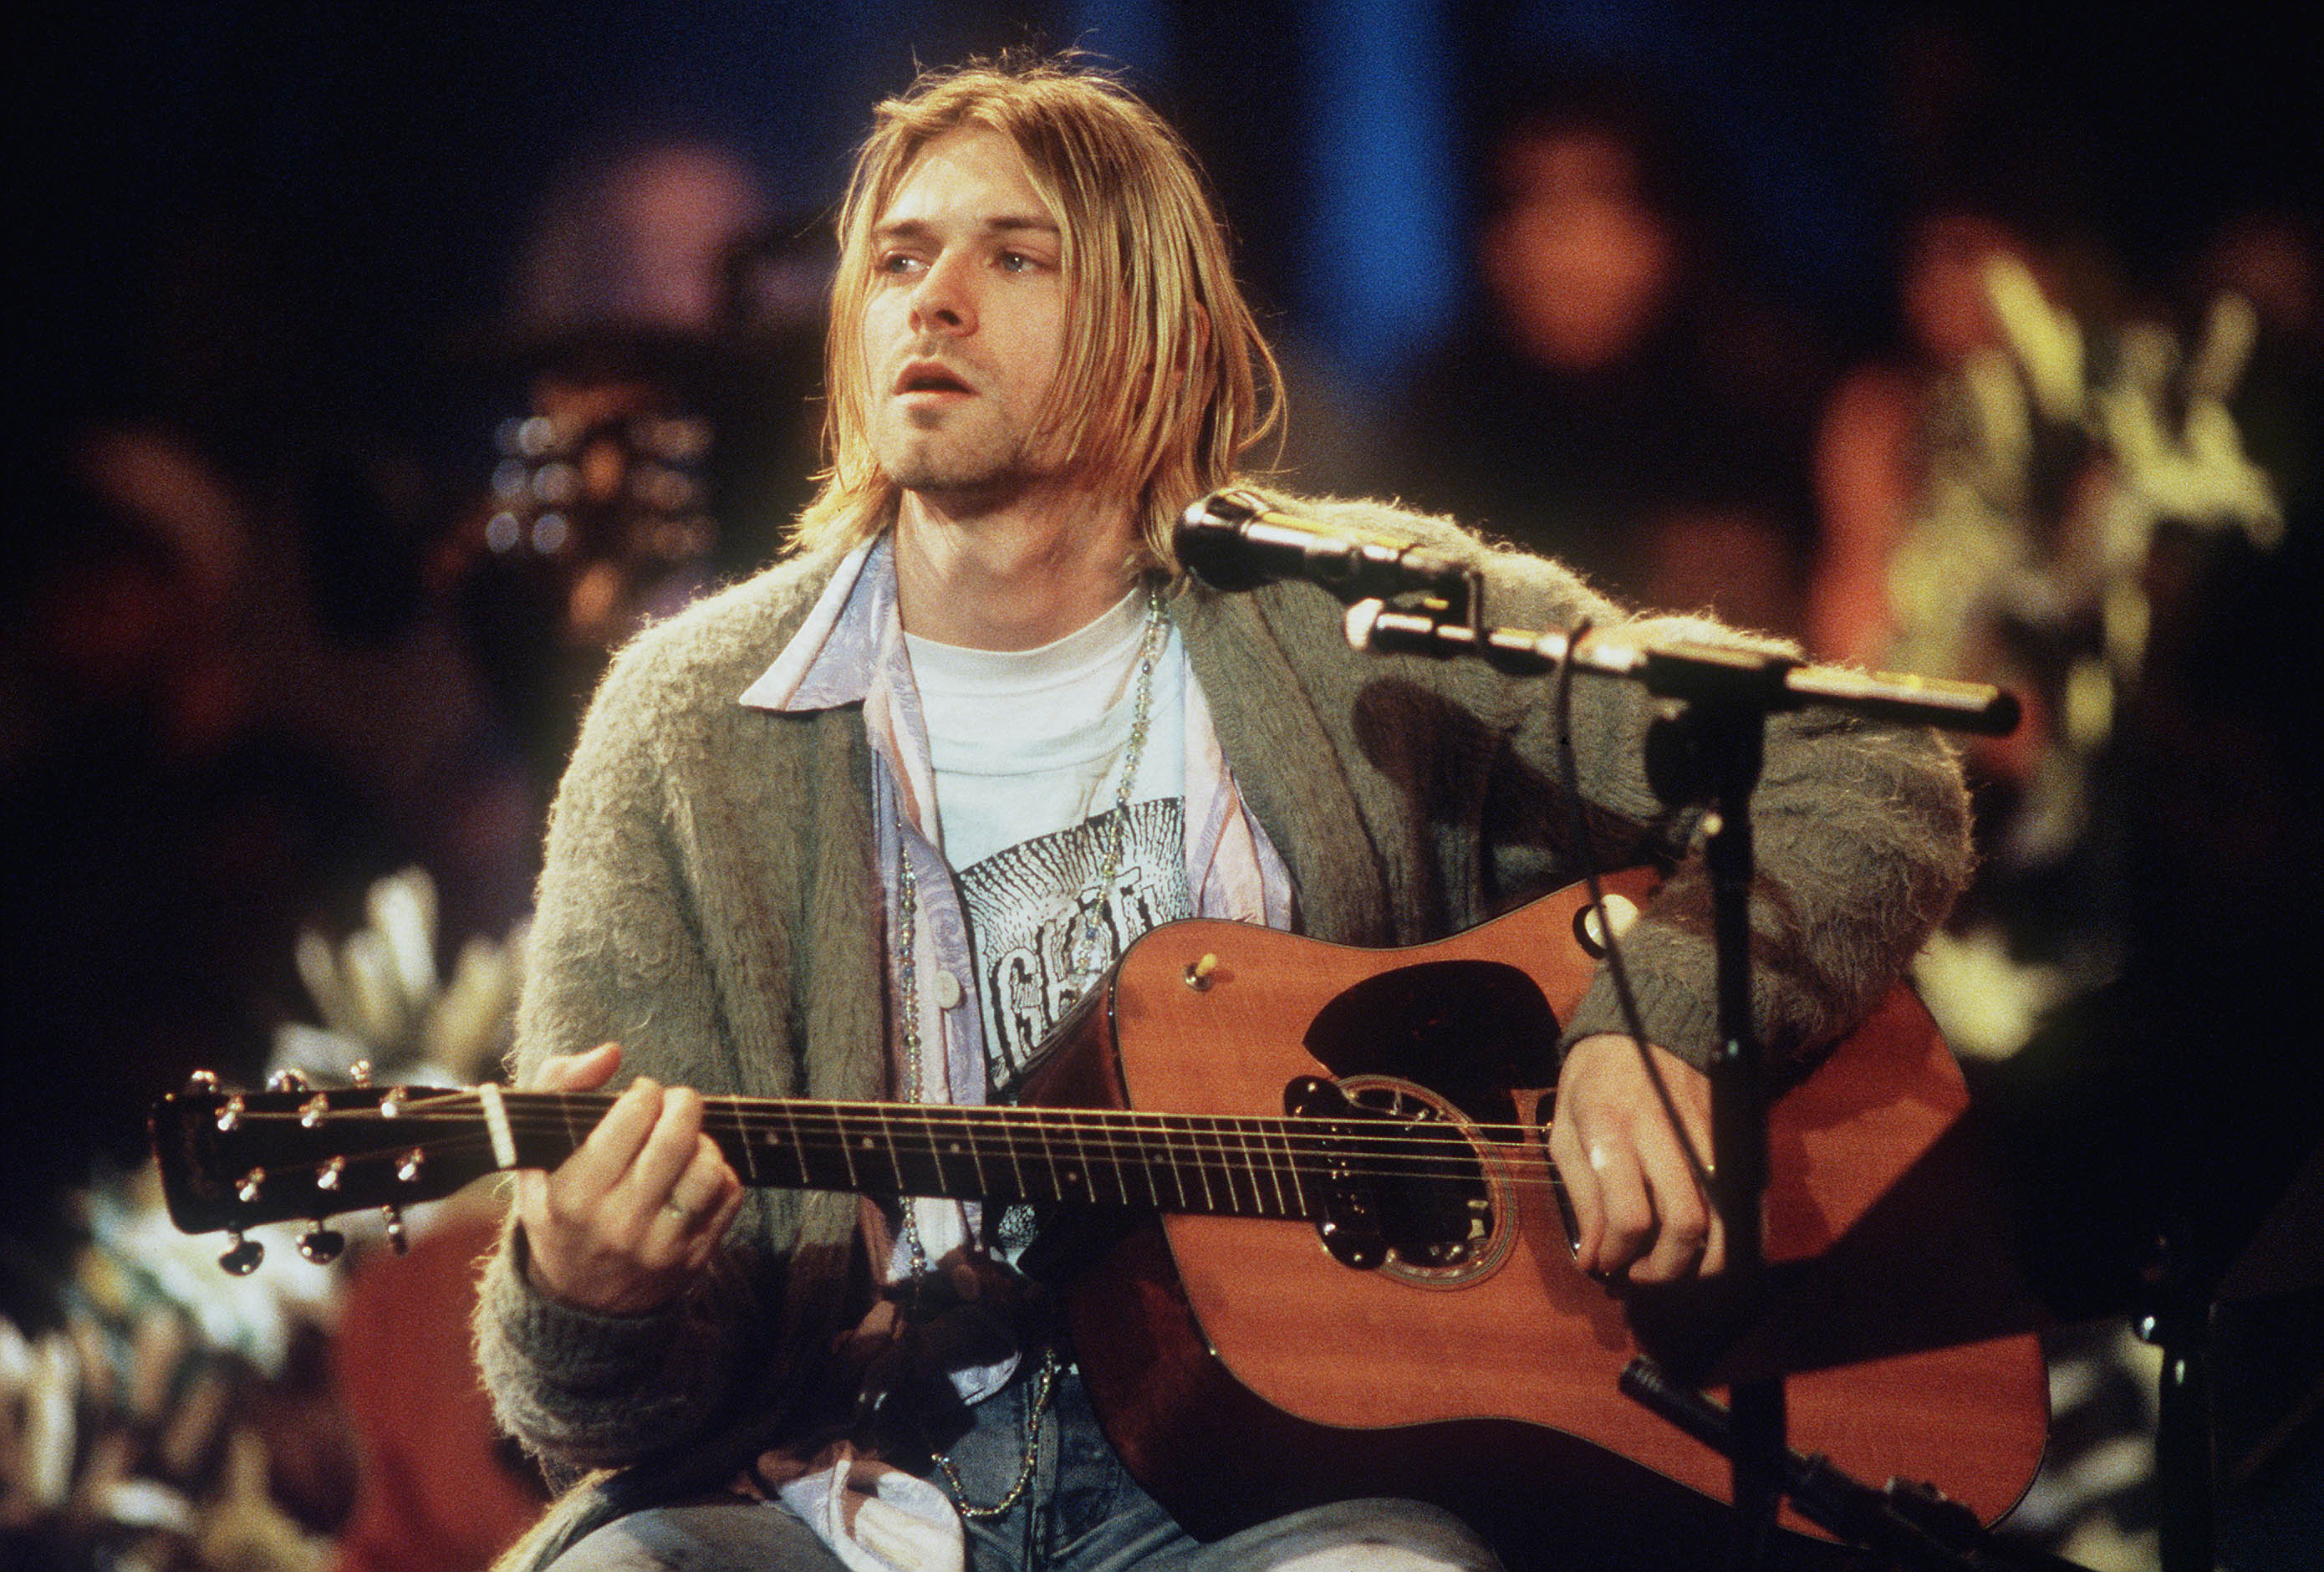 Cobain during the taping of MTV Unplugged at Sony Studios in New York City, 11/18/93. Photo by Frank Micelotta